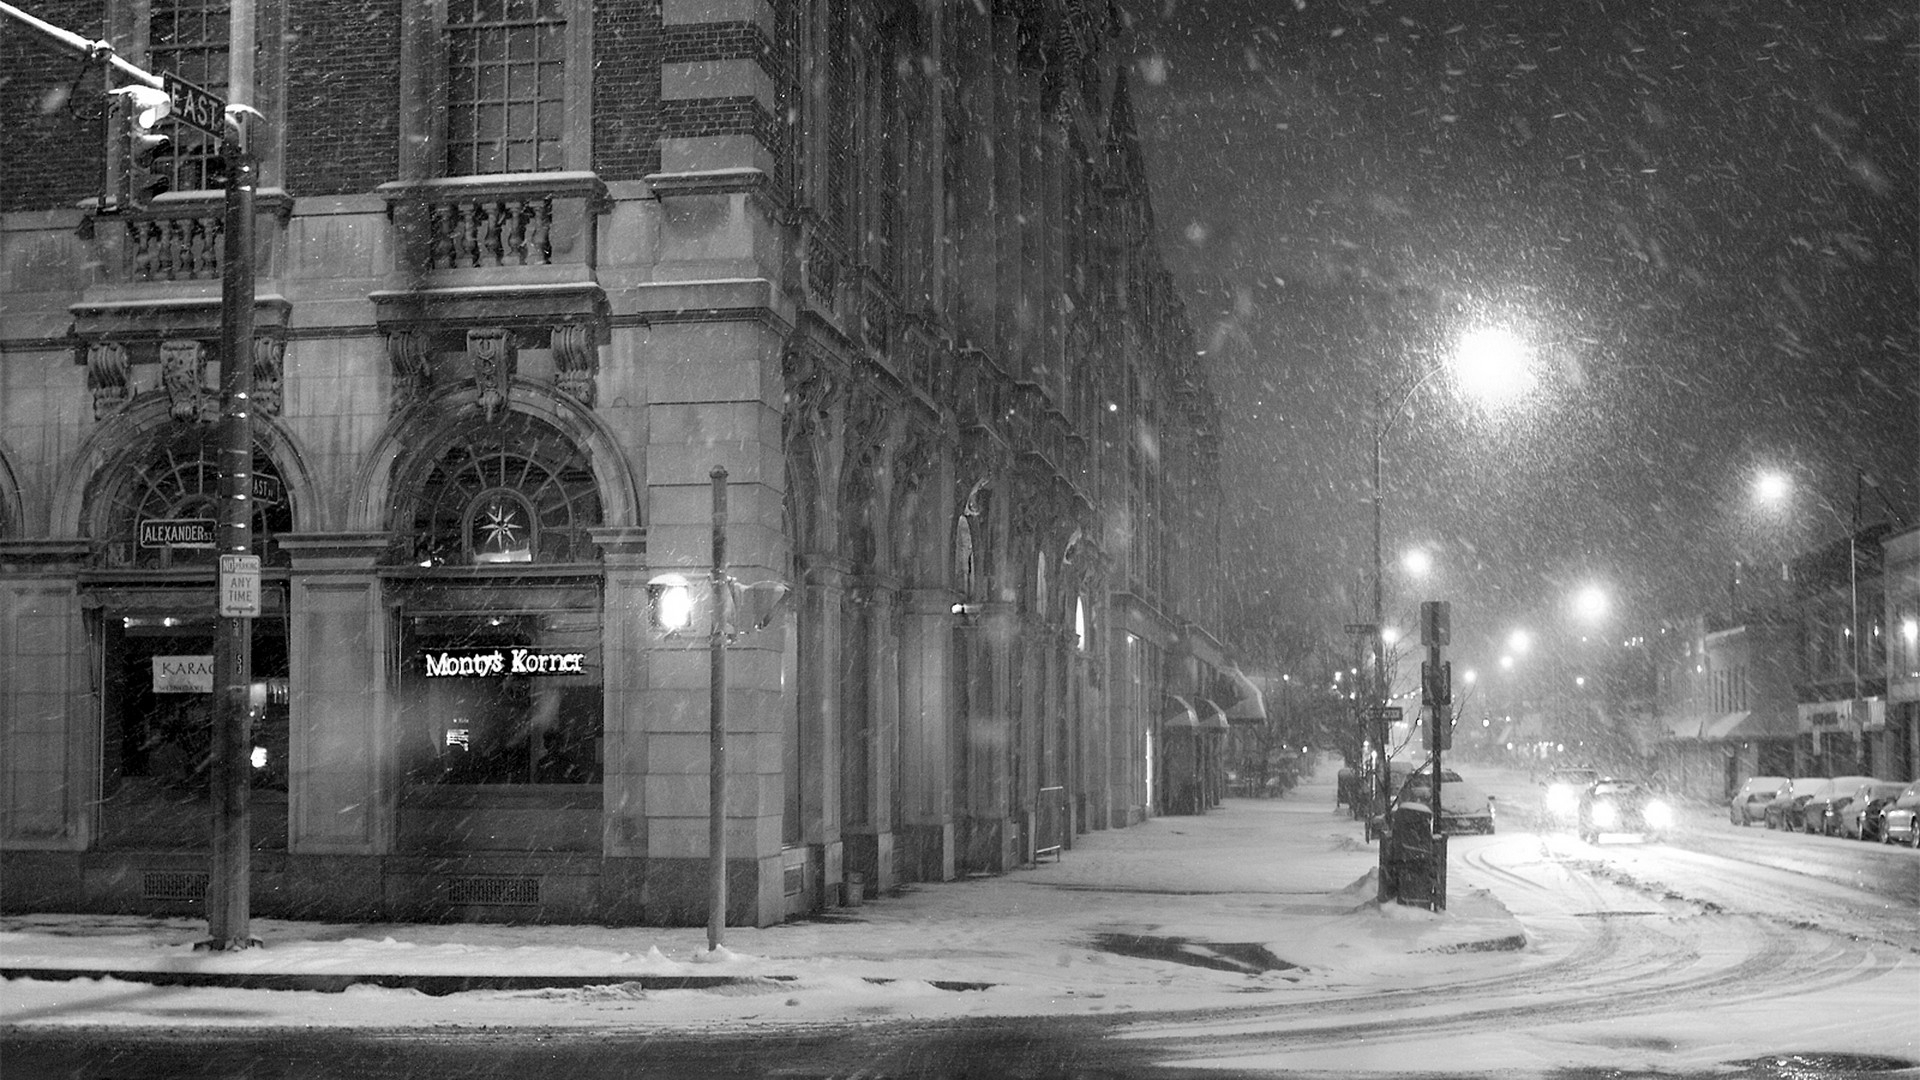 1920x1080 Wallpaper : street light, city, night, snow, winter, road, infrastructure, weather, darkness, lane, urban area, black and white, monochrome photography, black white 4kWallpaper 715474 HD Wallpapers